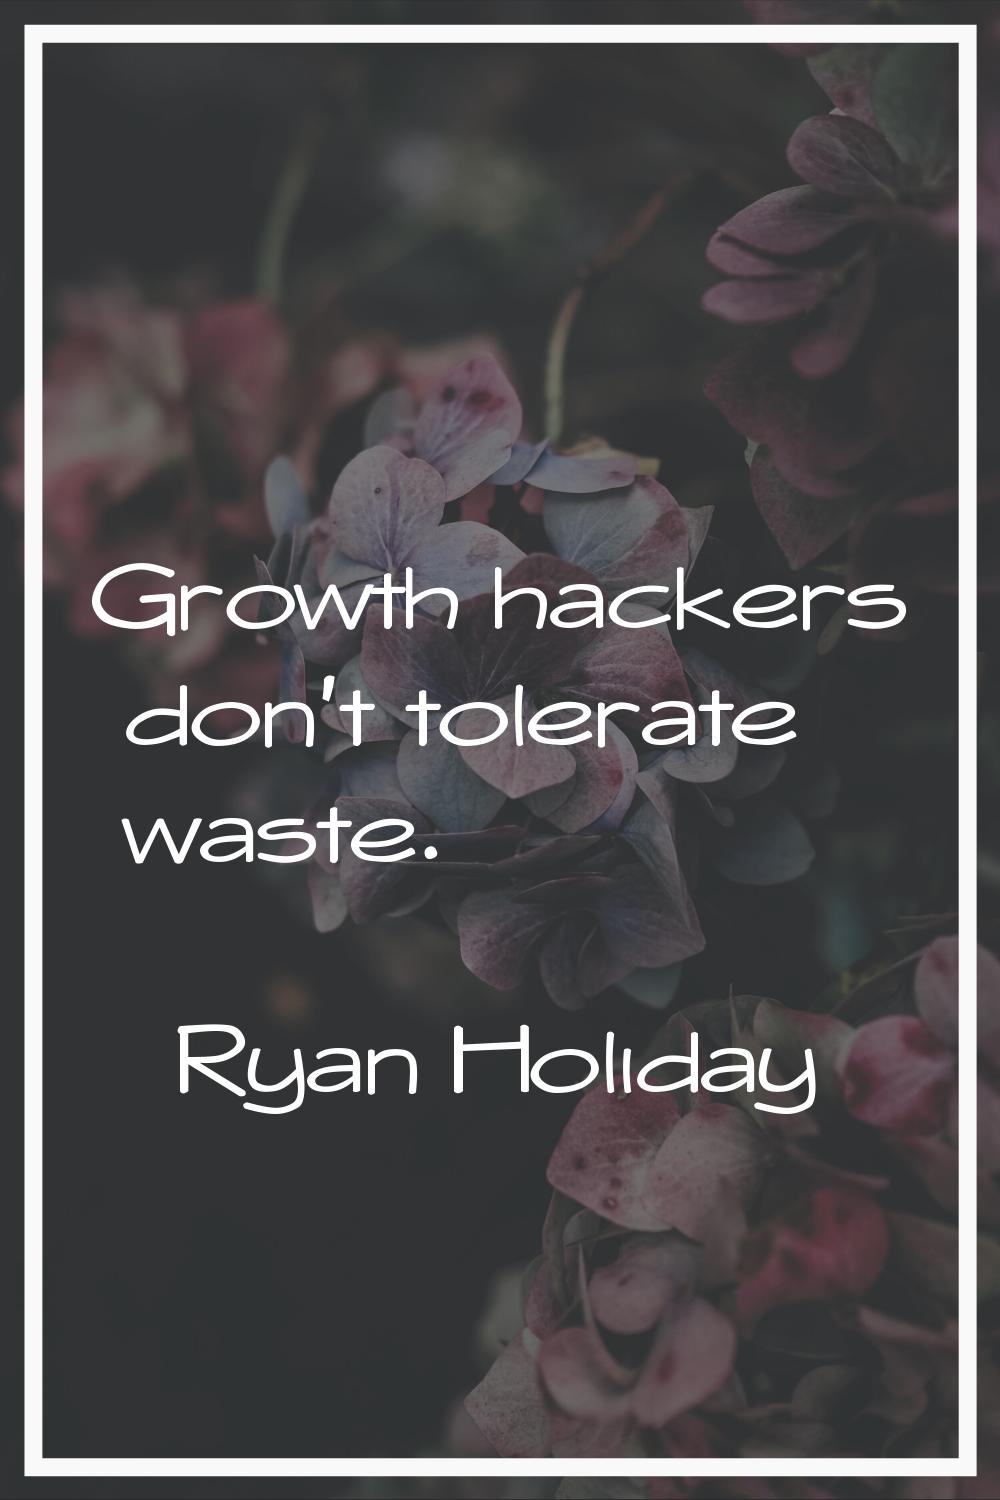 Growth hackers don't tolerate waste.